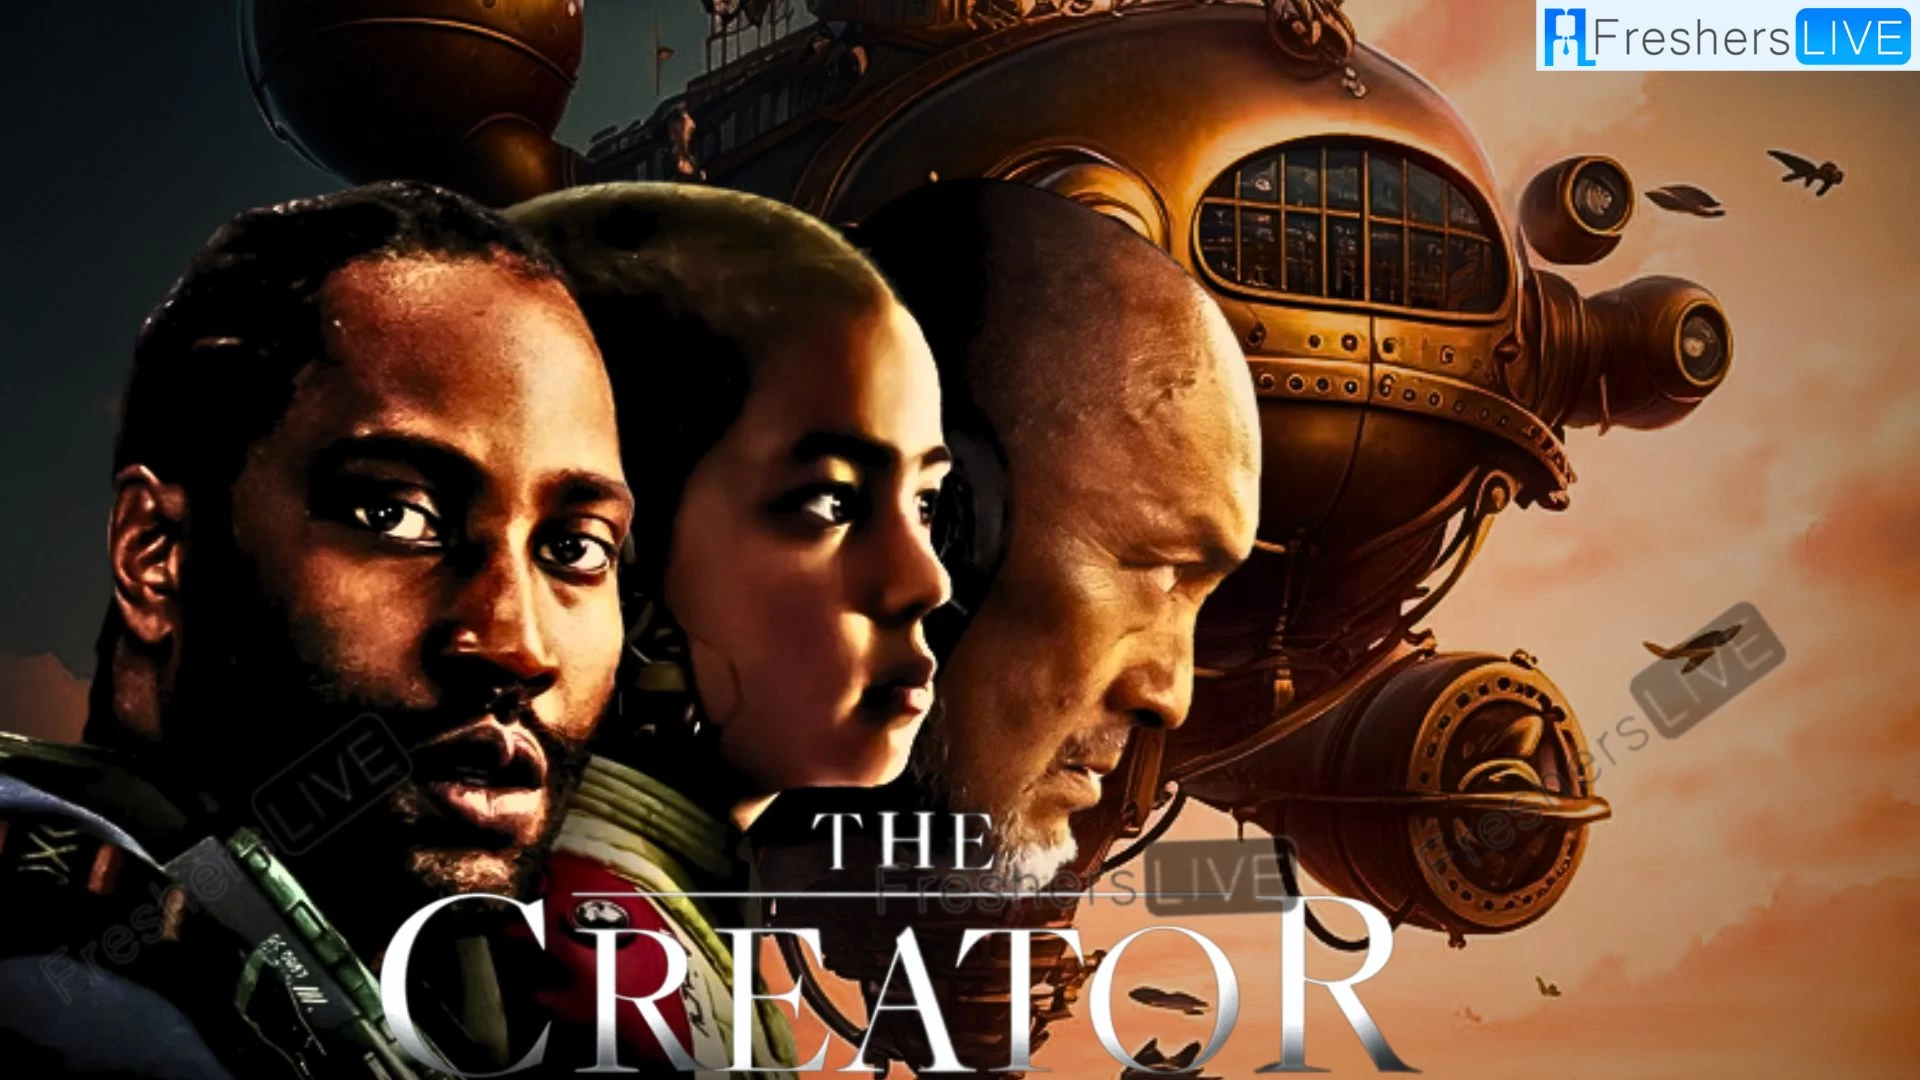 Is The Creator Movie Based on a Book? The Creator Movie Plot, Cast and Trailer